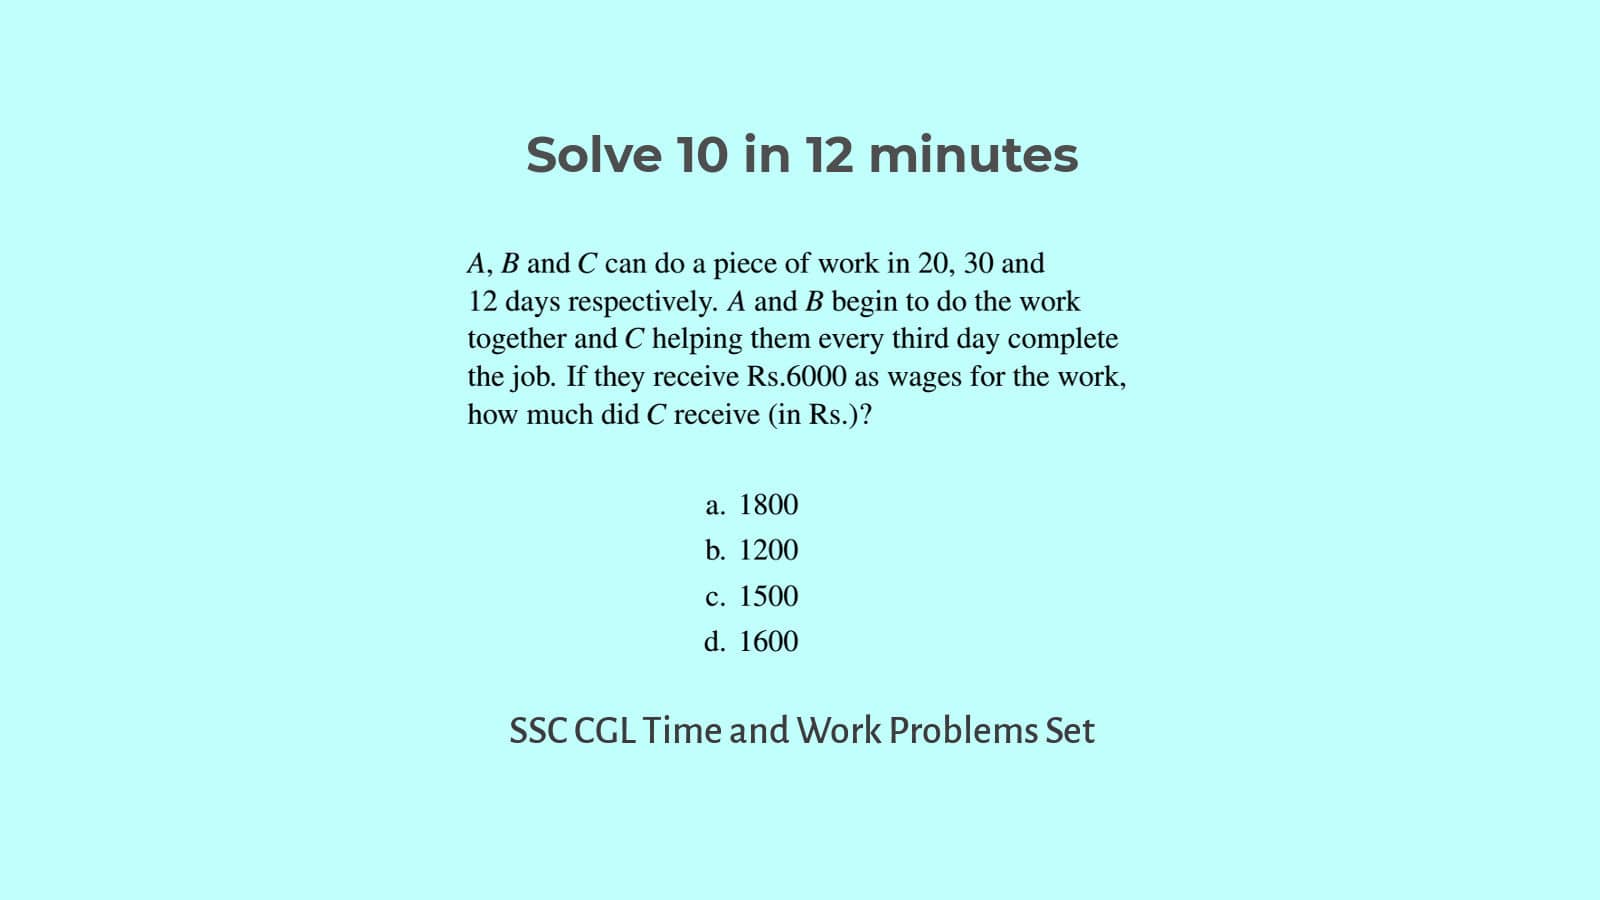 time-and-work-problems-for-ssc-cgl-set-32.jpg